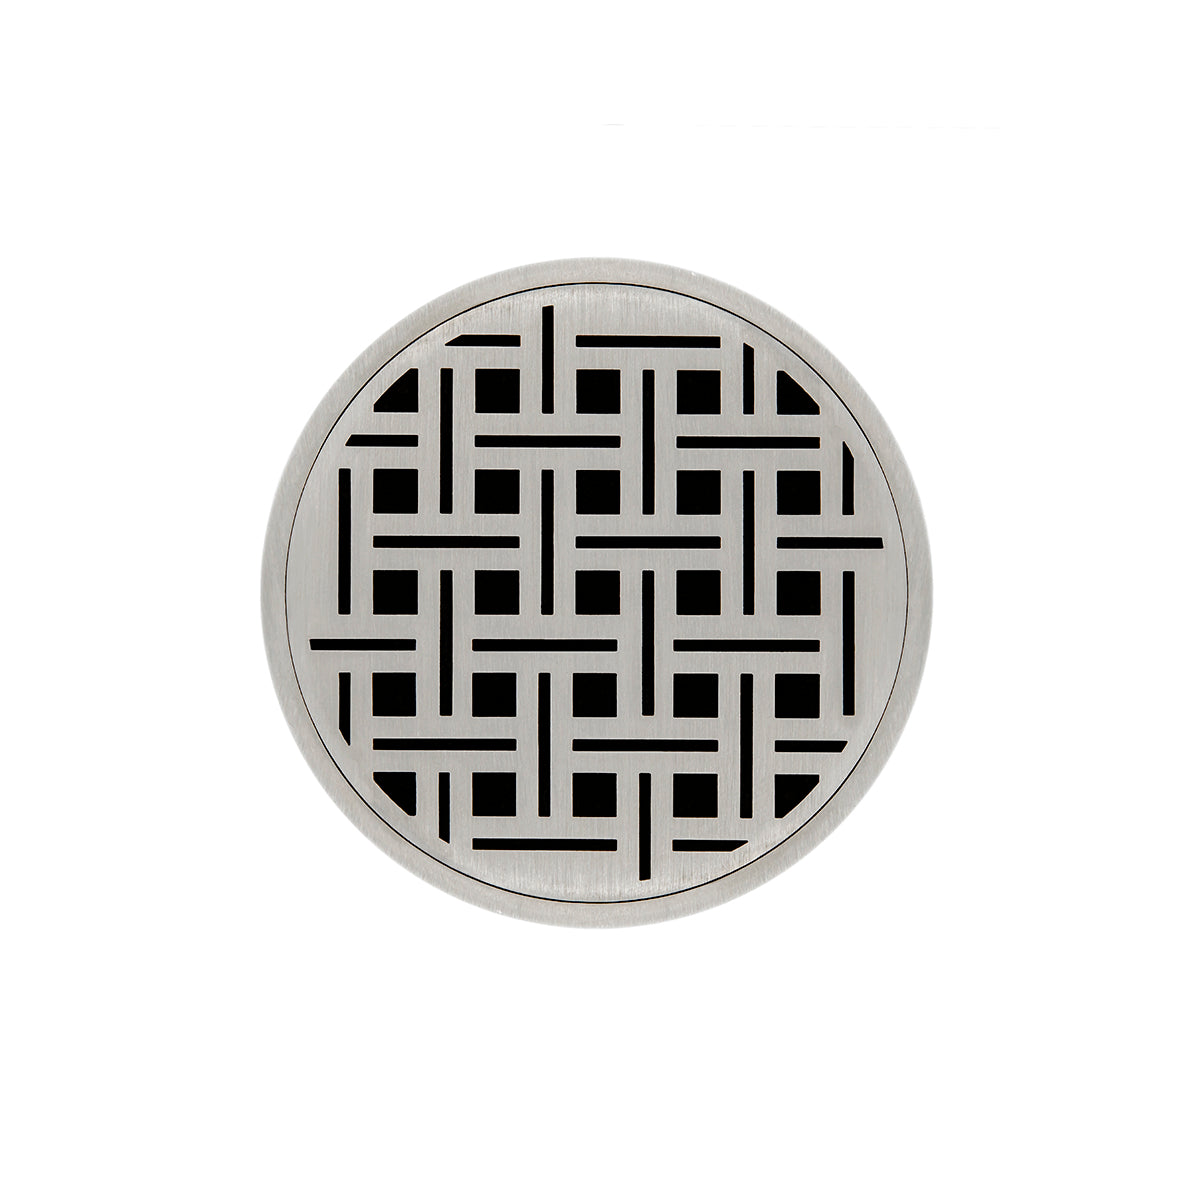 Infinity Drain 5" Round RVD 5 Premium Center Drain Kit with Weave Pattern Decorative Plate with Cast Iron Drain Body, 2" Outlet